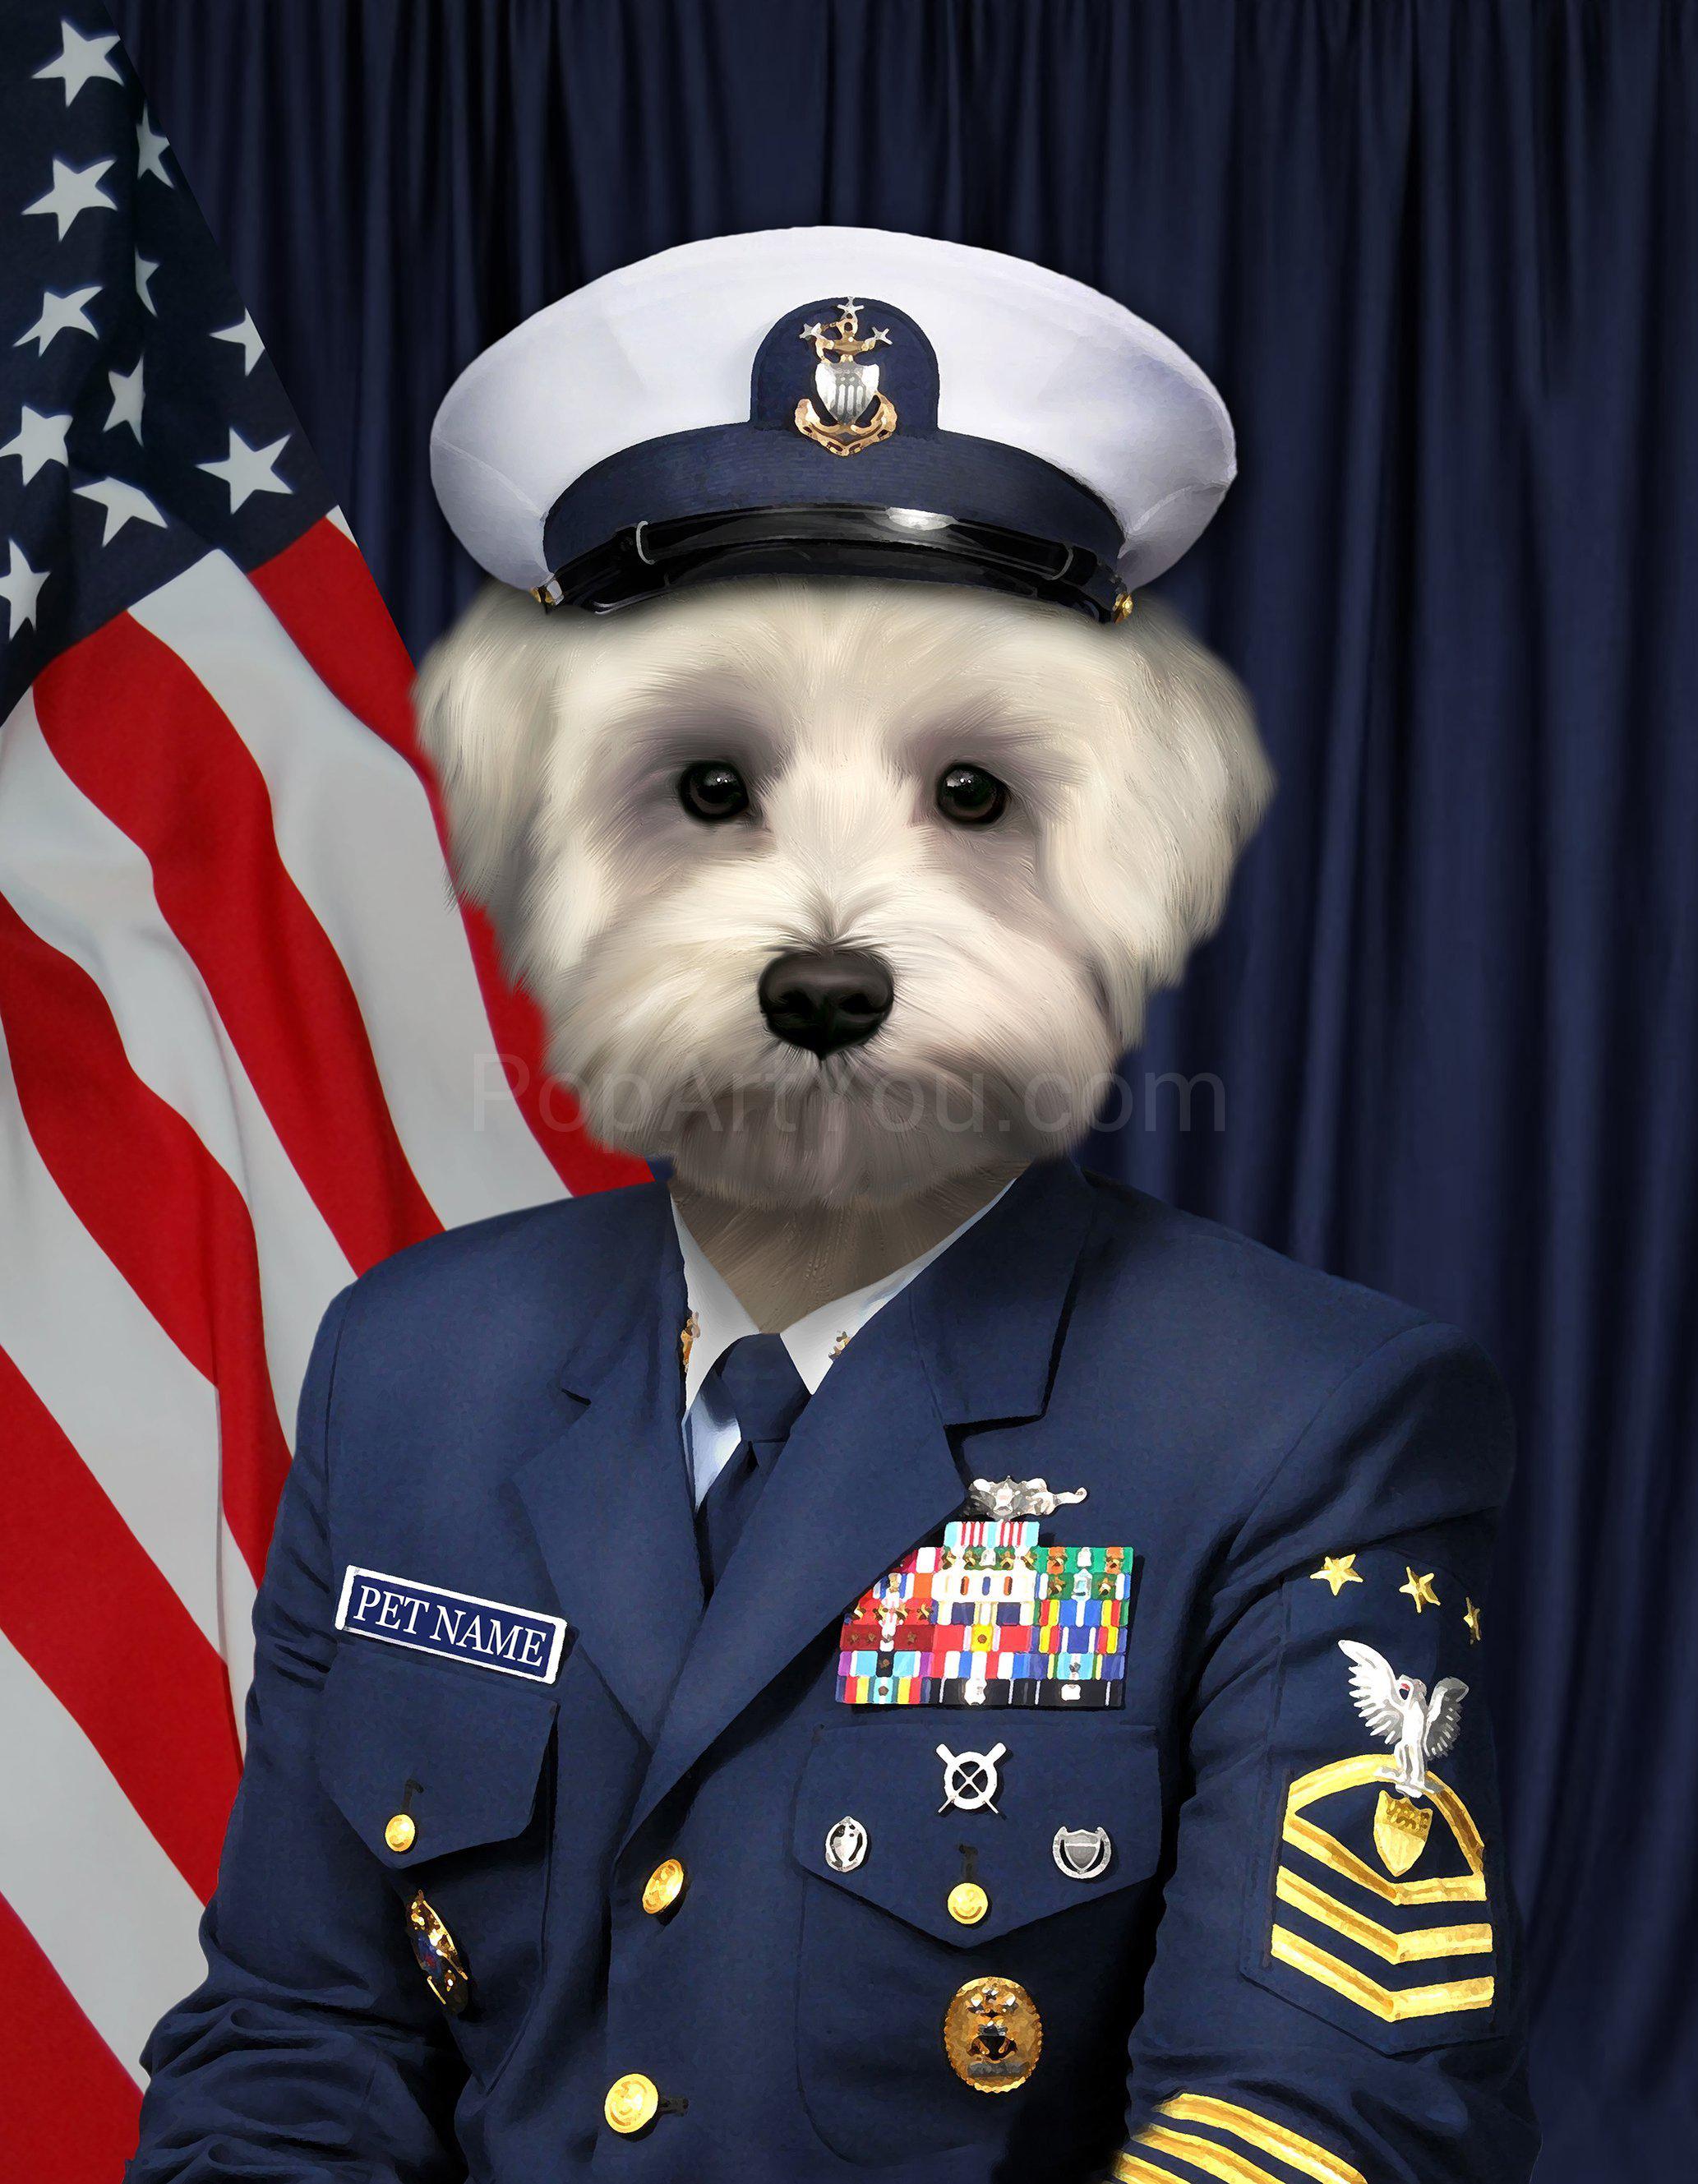 The portrait shows a dog dressed in blue navy attire with a hat standing near the American flag